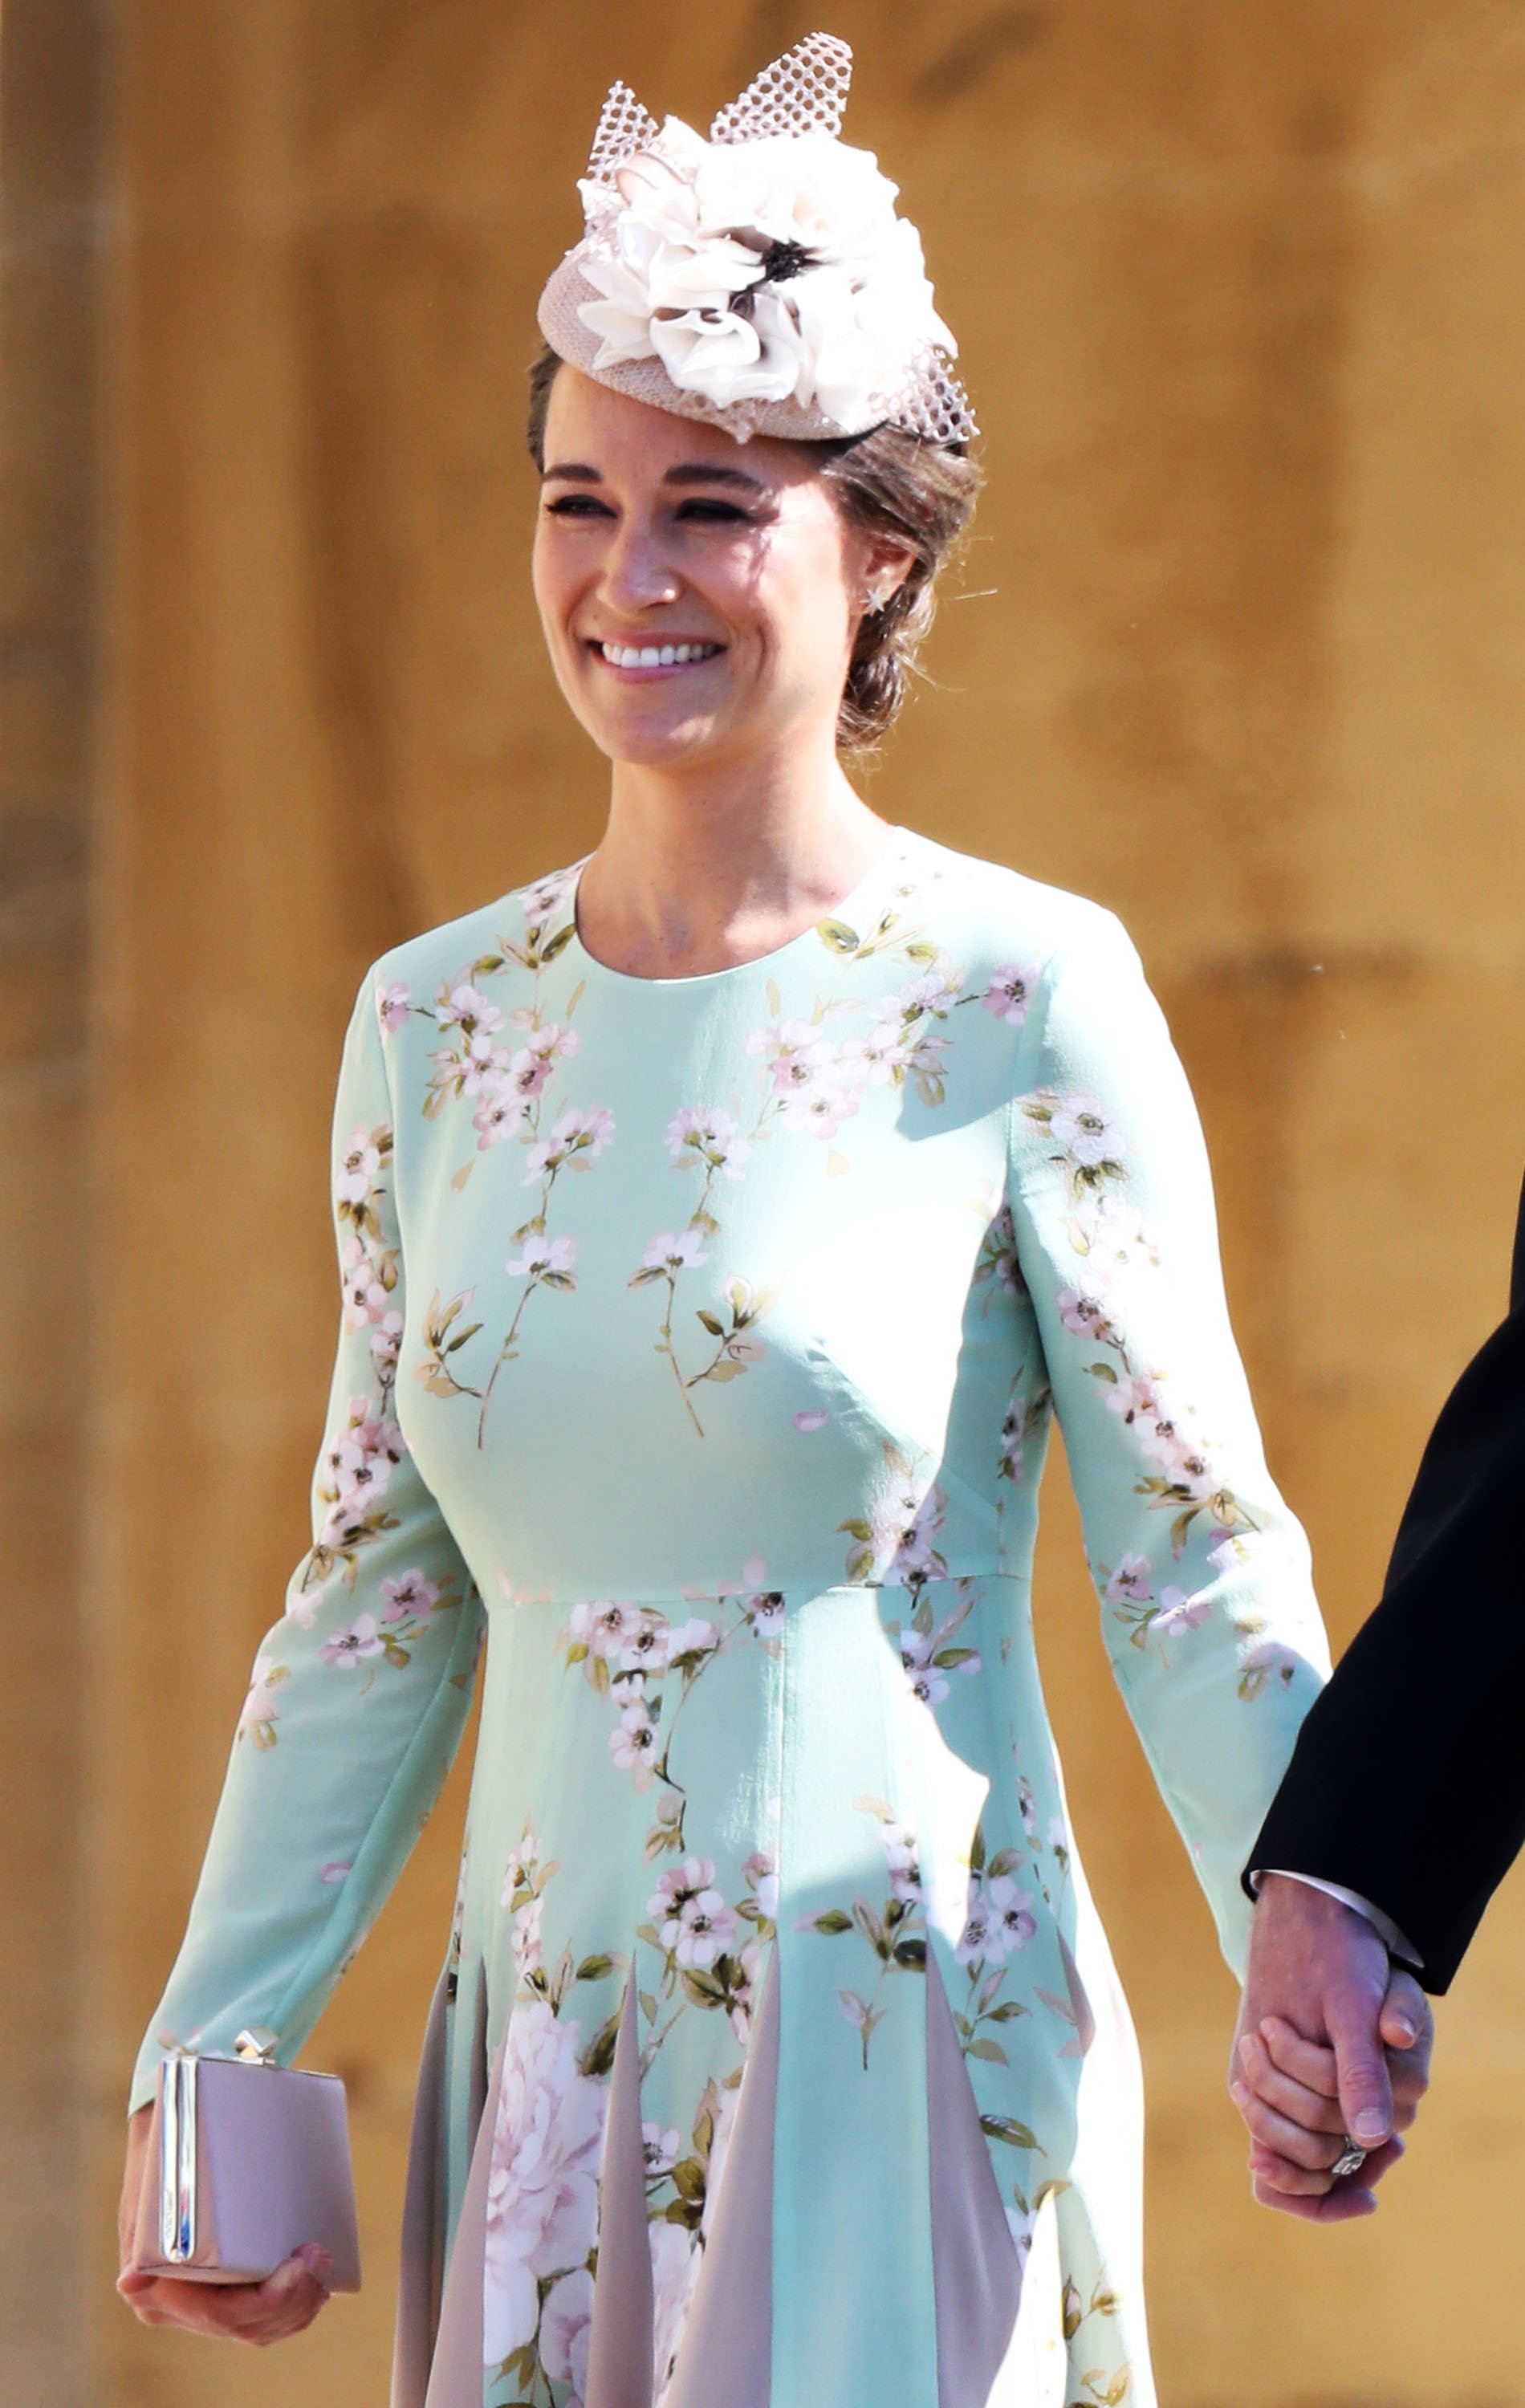 Pippa Middleton during the wedding of Prince Harry to Ms Meghan Markle, May 19, 2018 | Photo : Getty Images